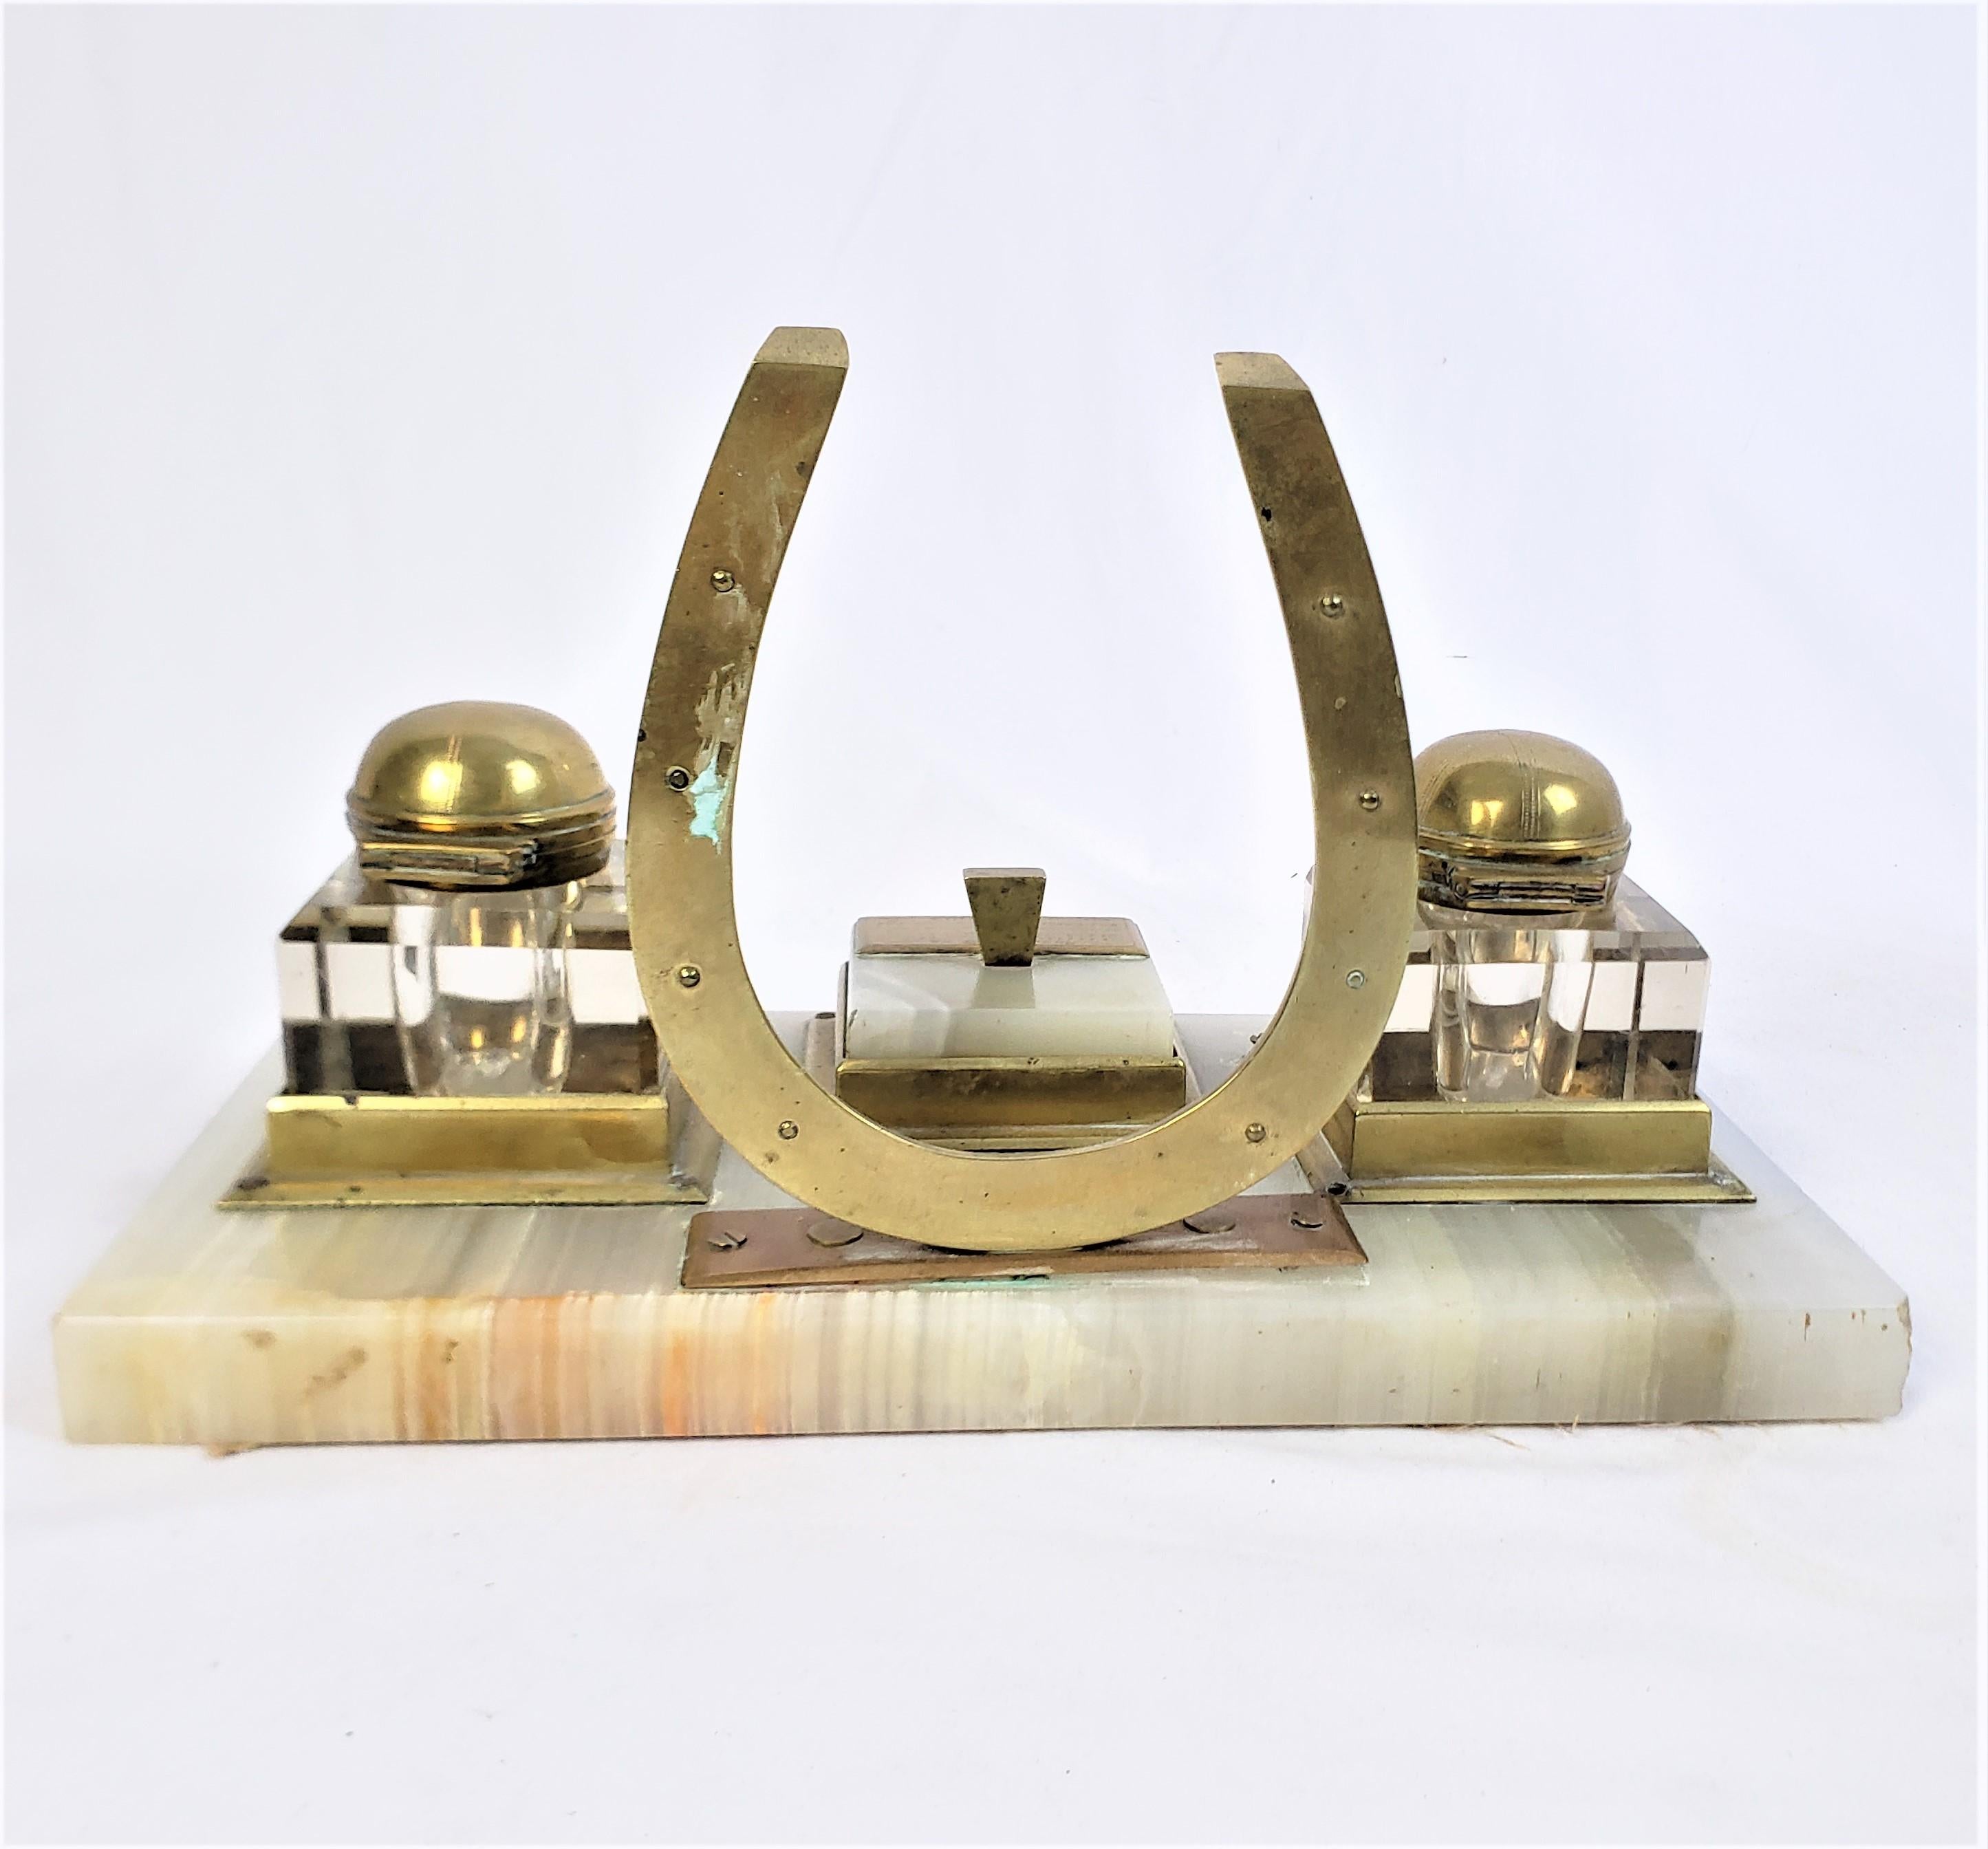 Machine-Made Antique English Presentation Inkwell & Desk Set with Horse Jockey Theme For Sale